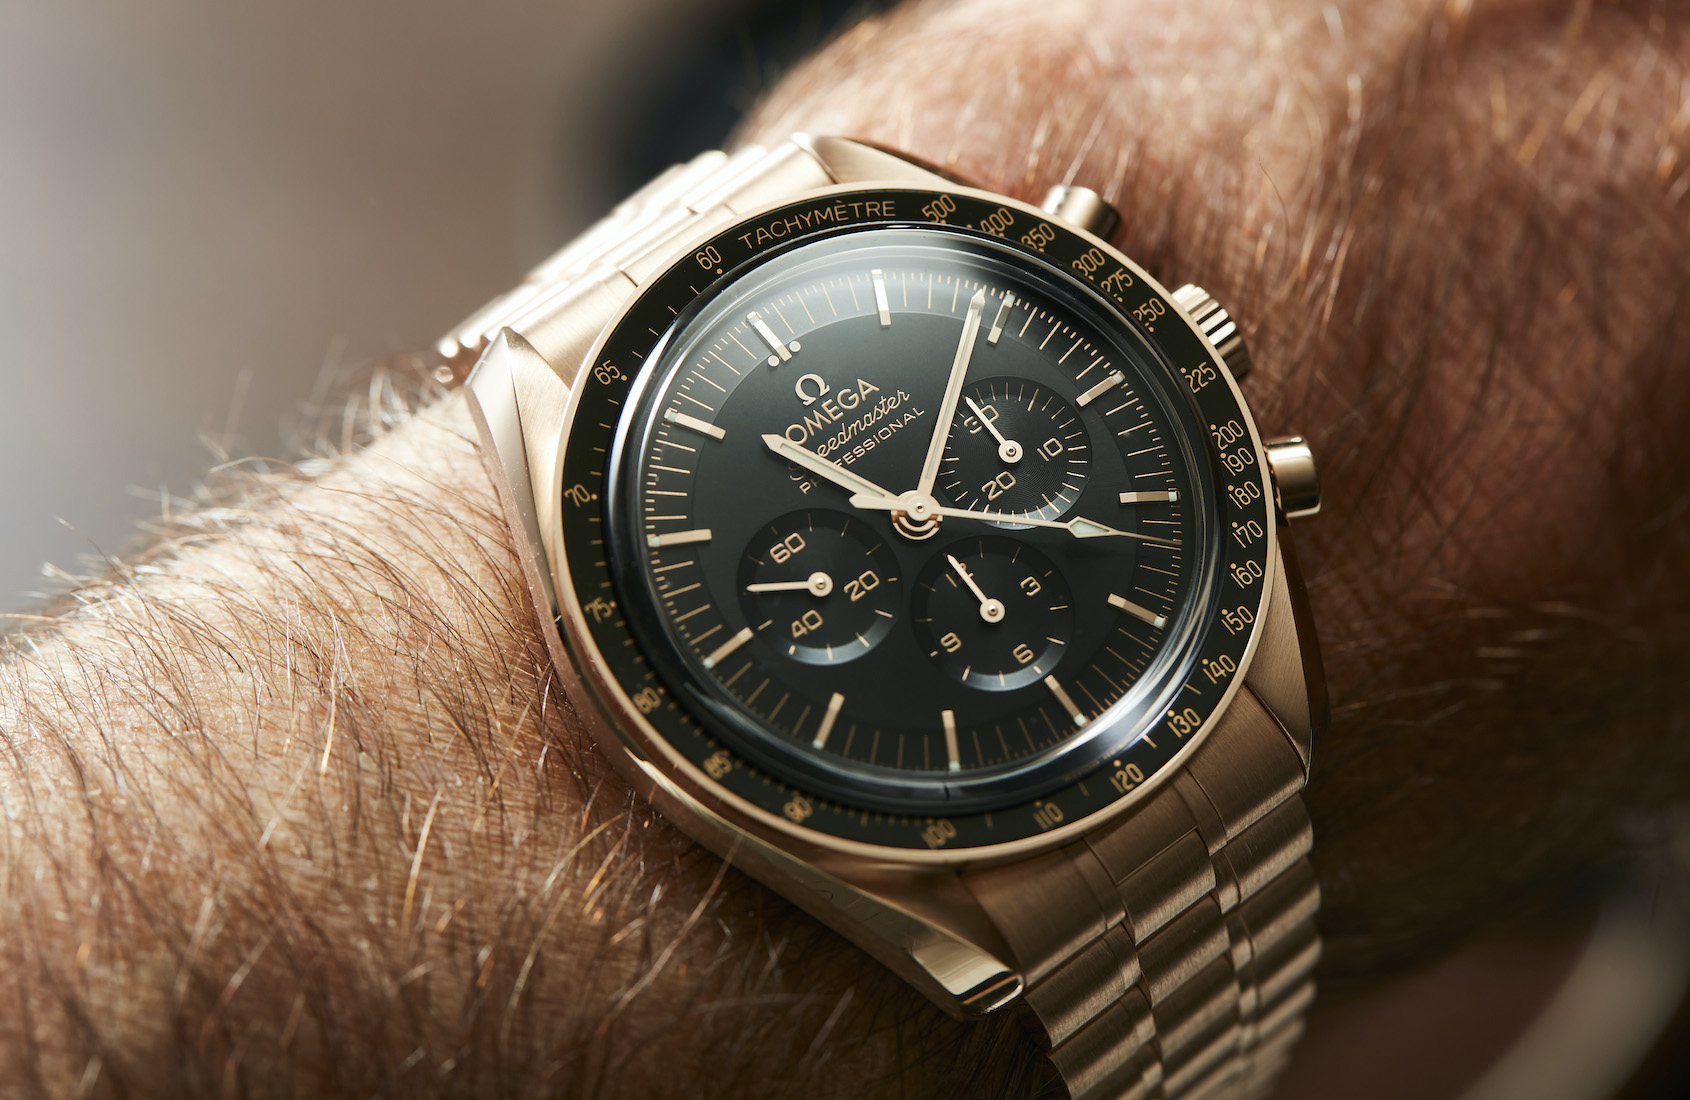 In Depth This Omega Speedmaster Moonwatch Is As Good As Sedna Gold Time And Tide Watches